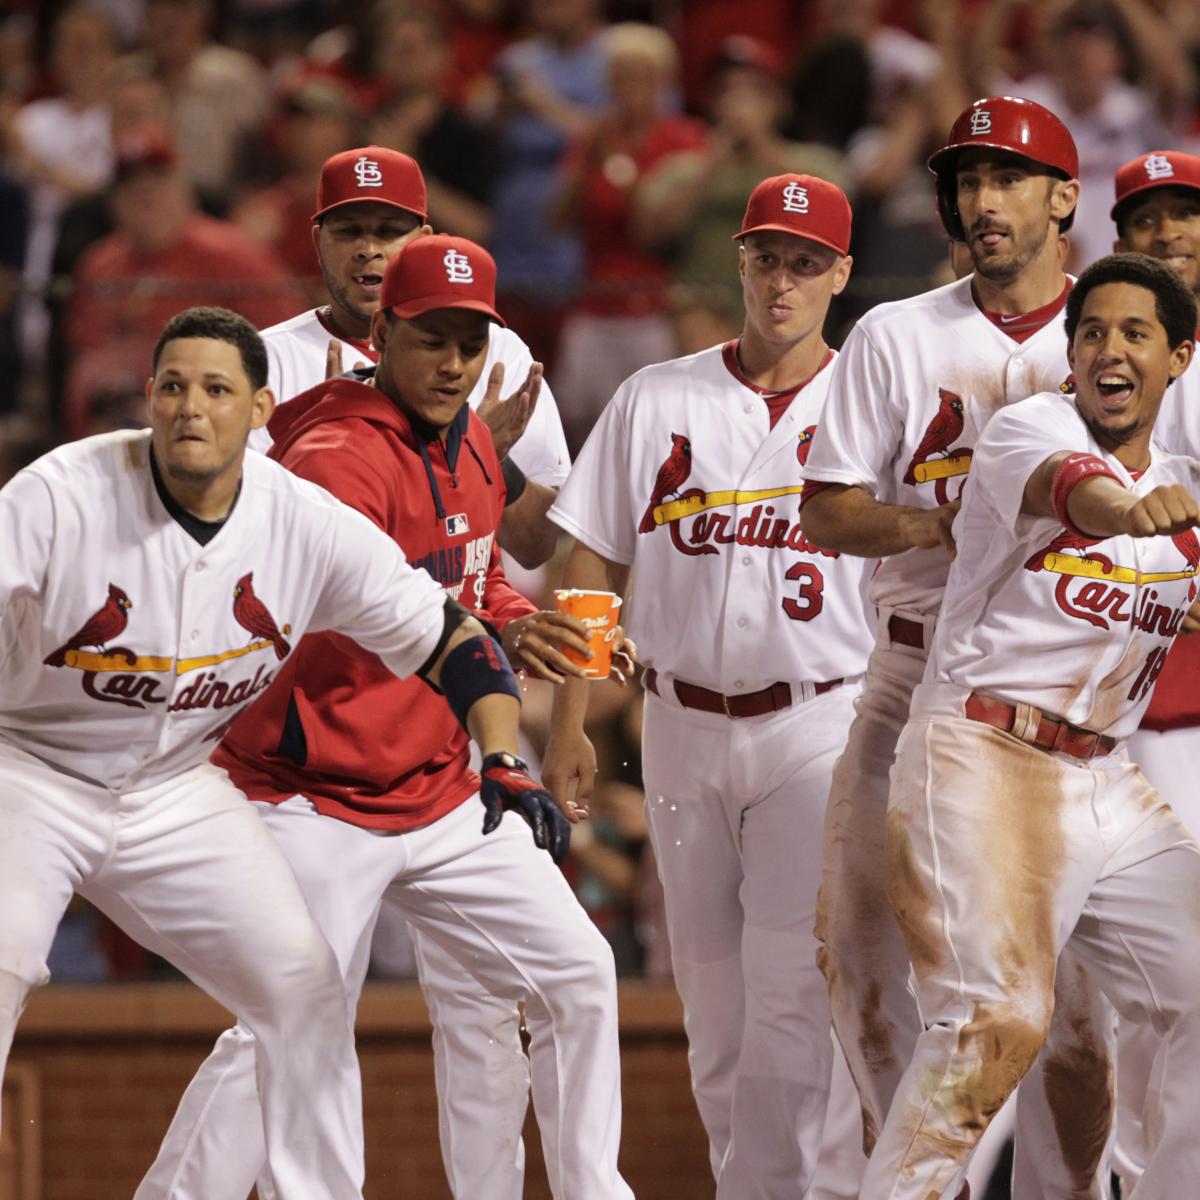 Scouting Reports for St. Louis Cardinals&#39; Prospects in the 2014 Futures Game | Bleacher Report ...